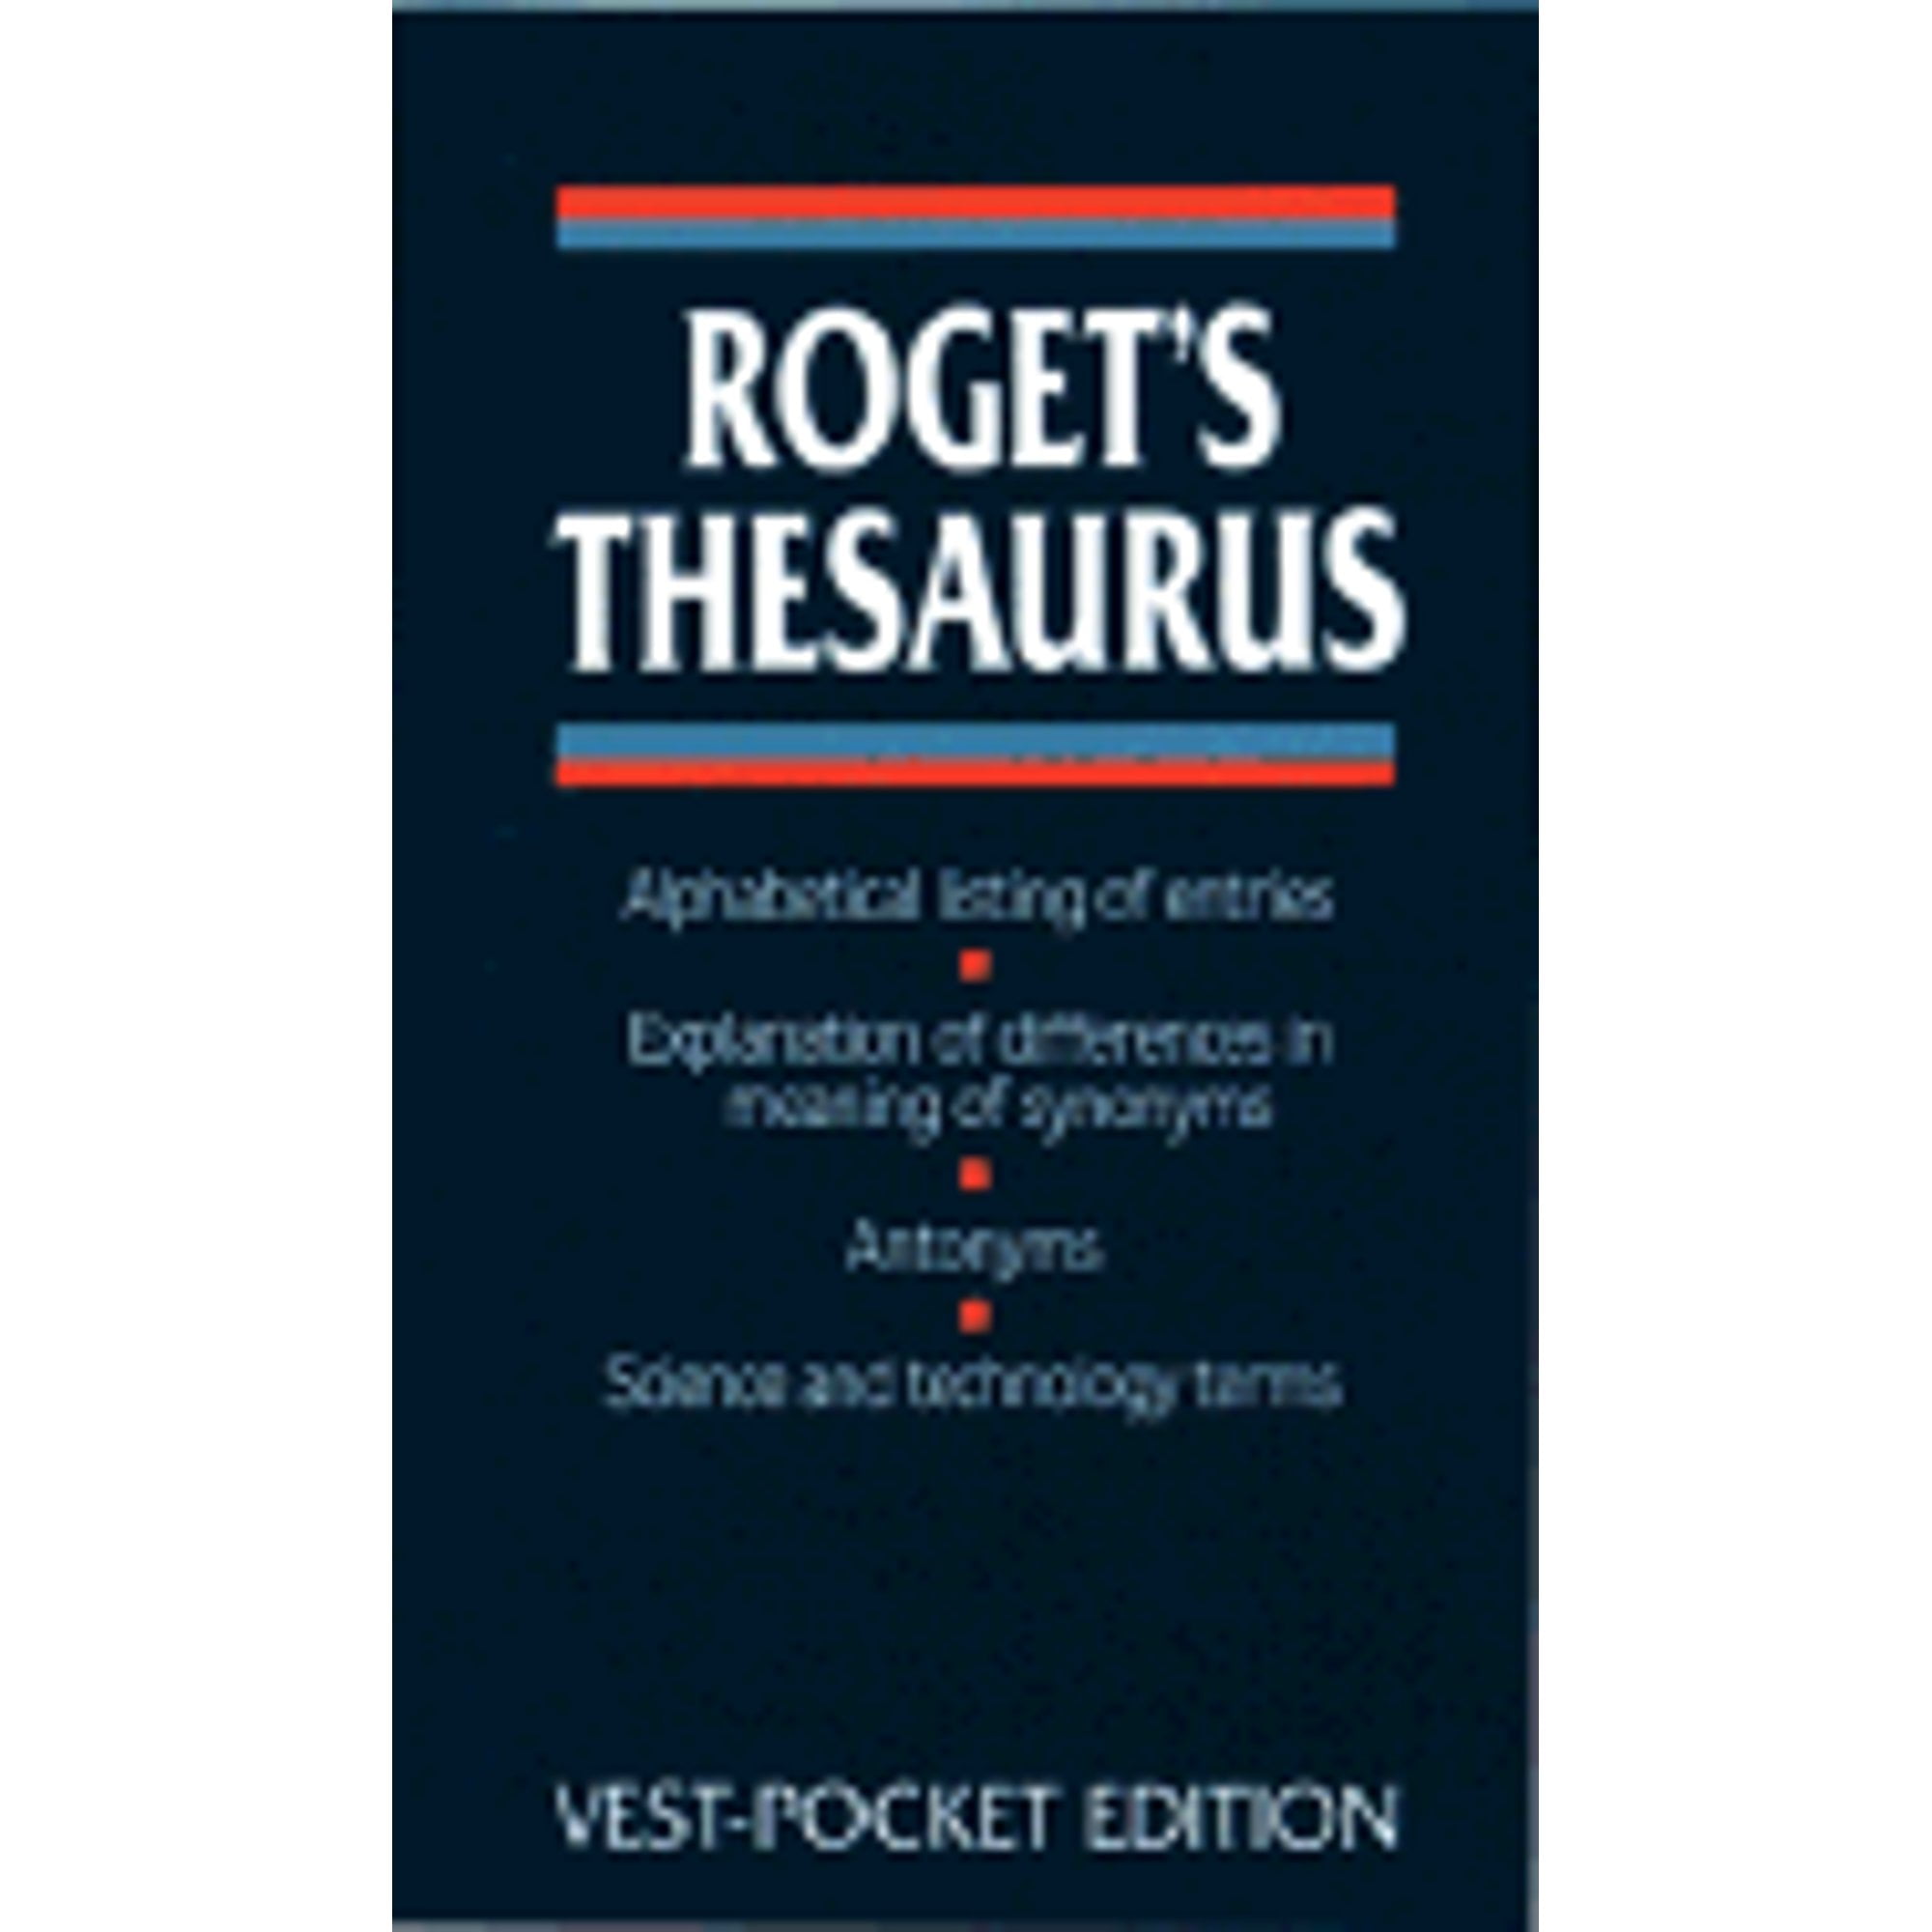 (Paperback)　by　Company,　Houghton　Of　Vest-Pocket　Edition　Heritage　American　Roget's　Editors　The　Dictionary　Heritage　Thesaurus,　Mifflin　American　(Editor),　Dictionaries